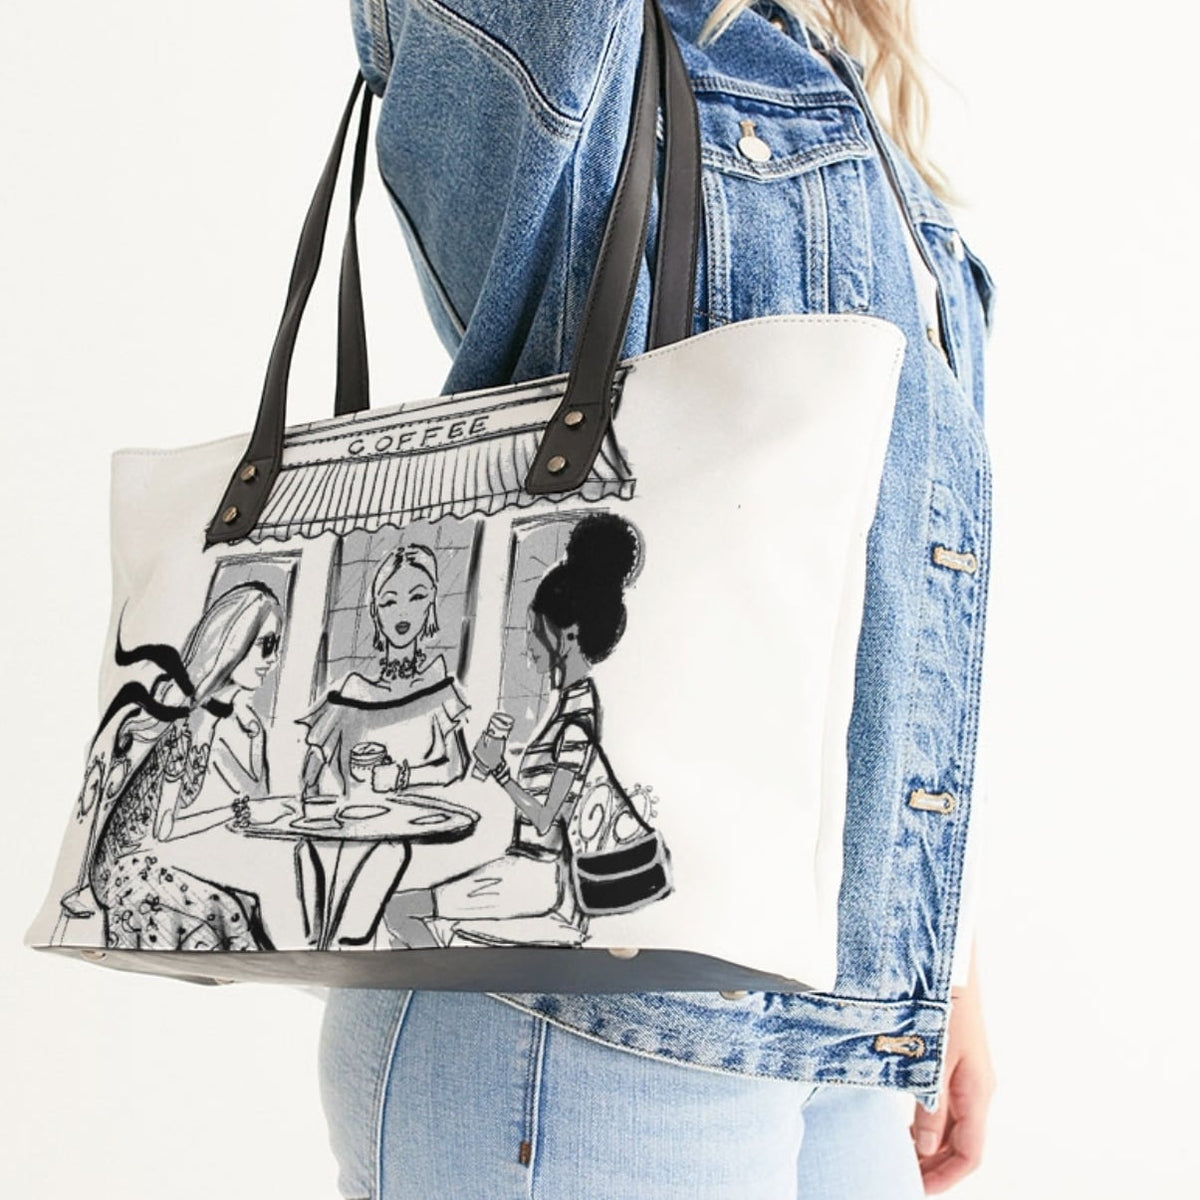 CAFE' PRINT TOTE